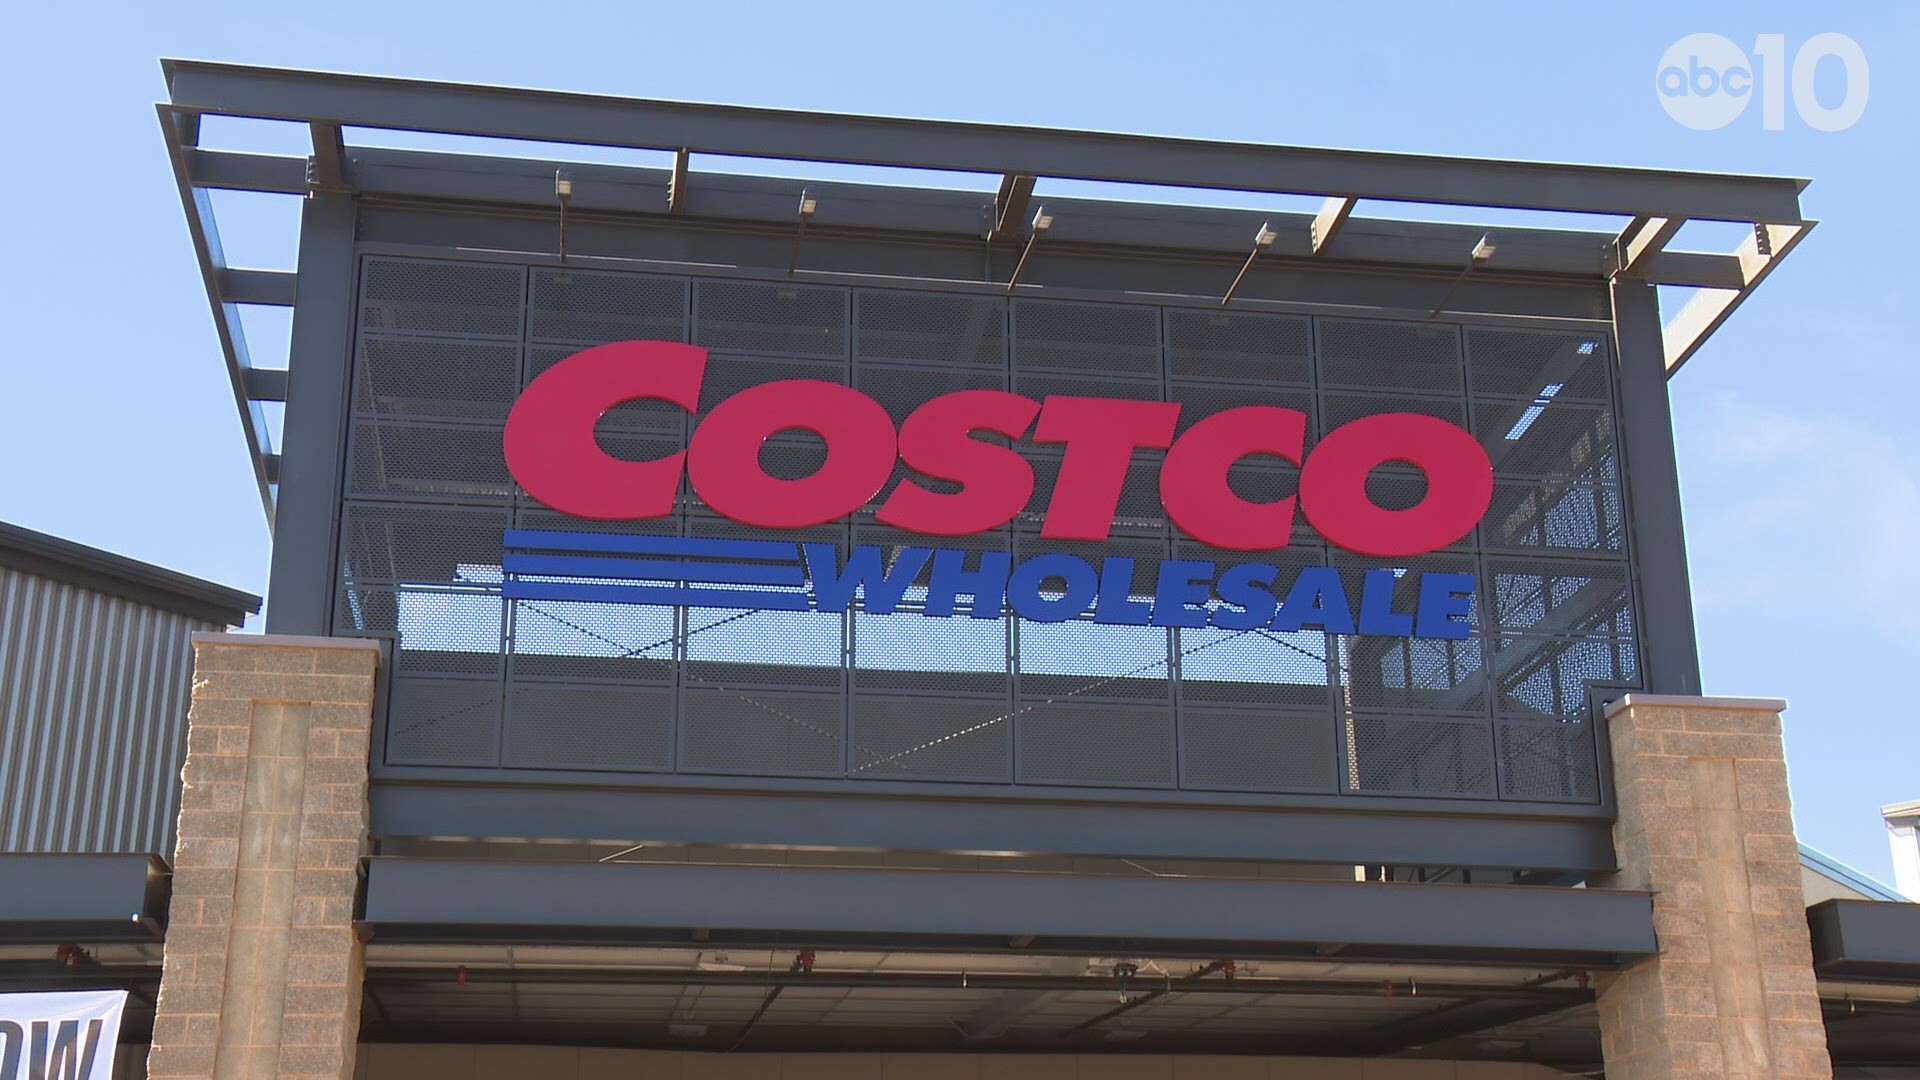 Everything you need to know about if, and when, a new Costco might be built in El Dorado Hills.